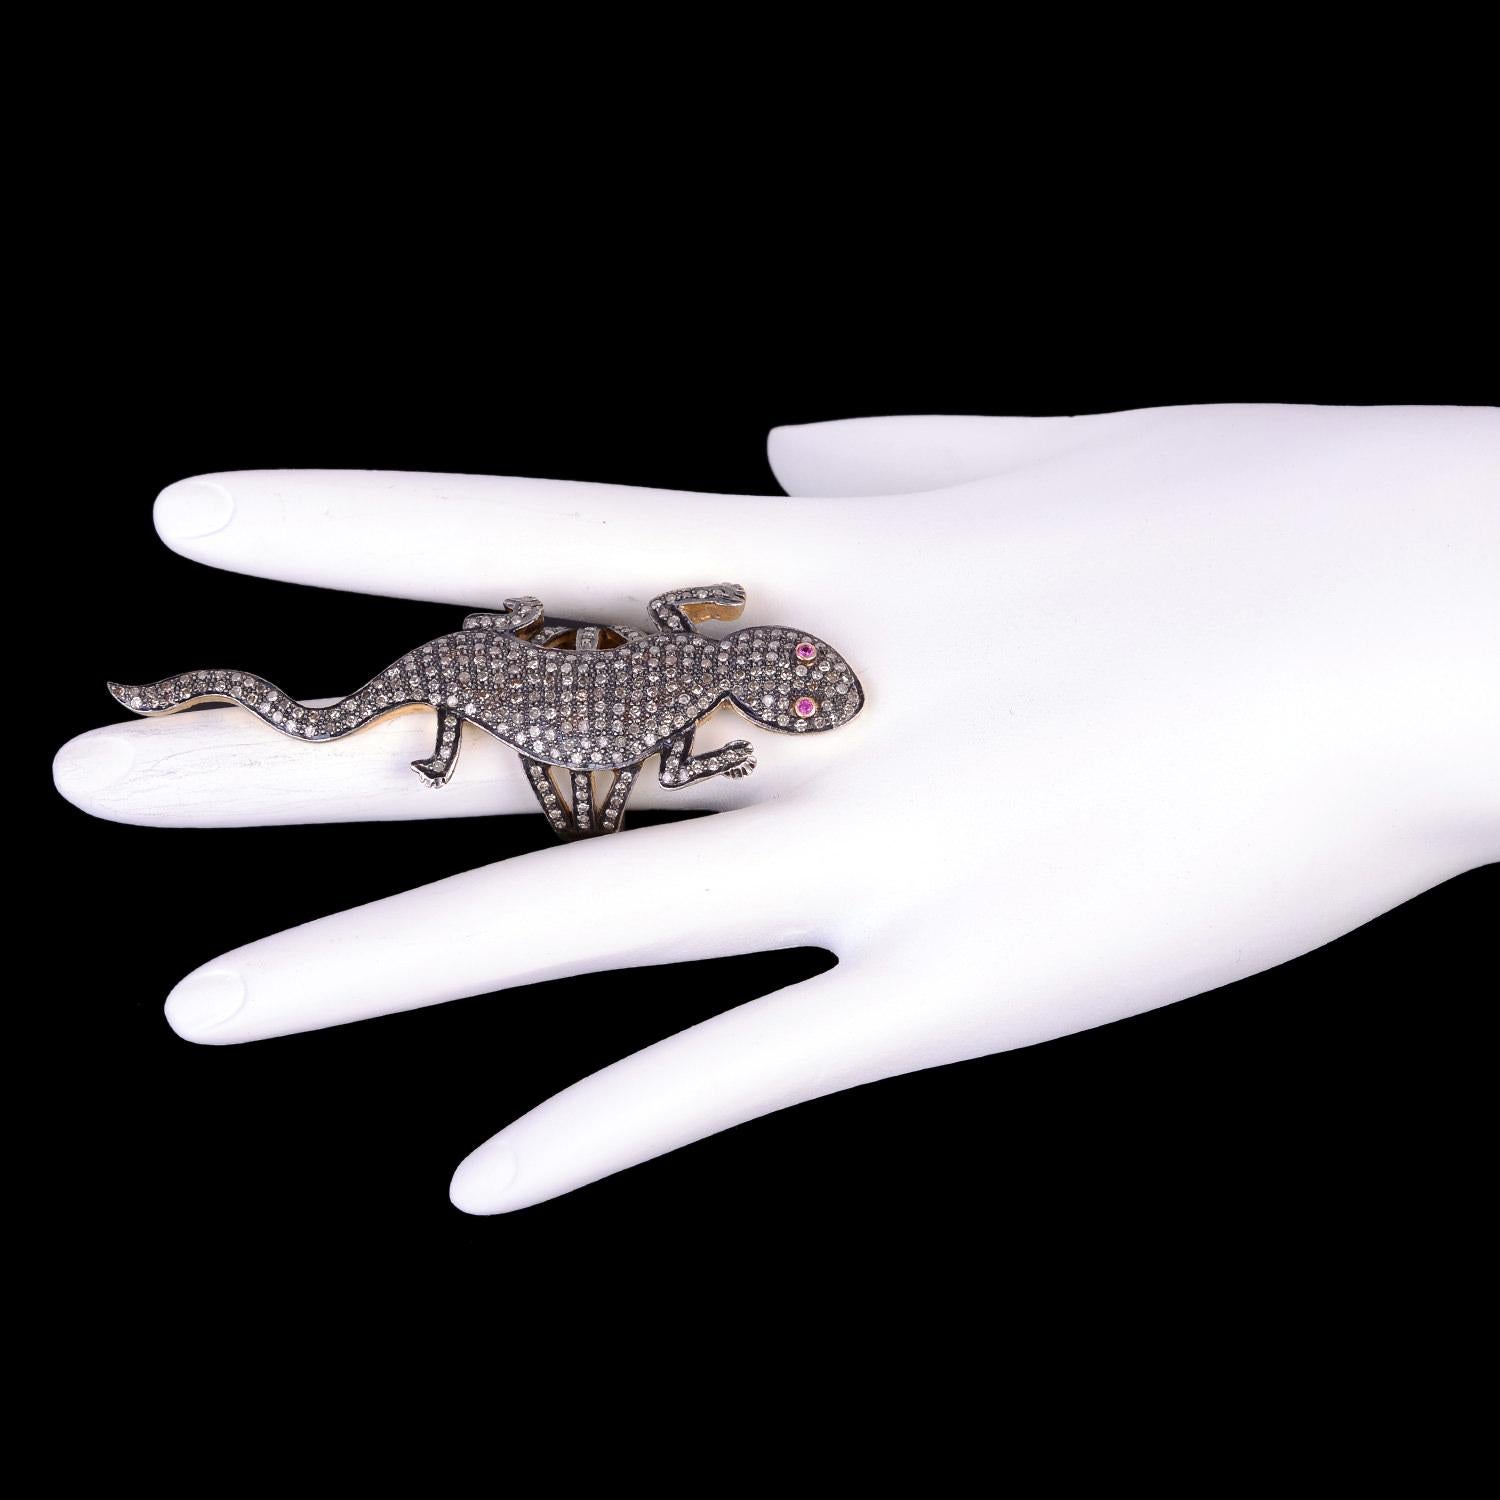 Mixed Cut Lizard Shaped Pave Diamond Ring With Ruby Eyes Made In 14k Yellow Gold & Silver For Sale